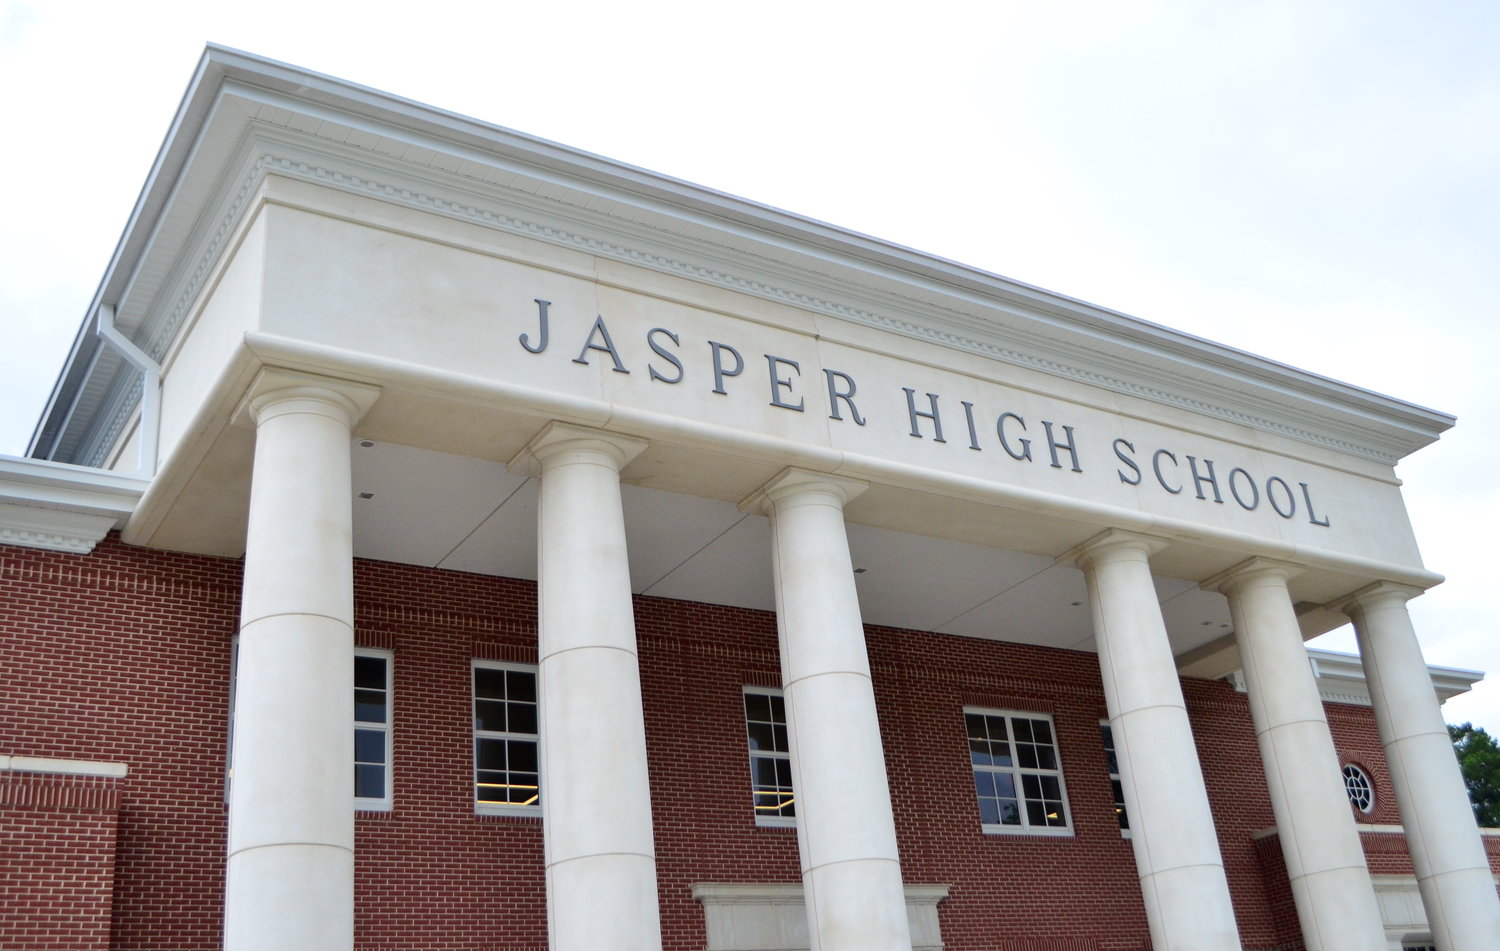 Developing News: Jasper schools, Bevill placed on lockdown due to